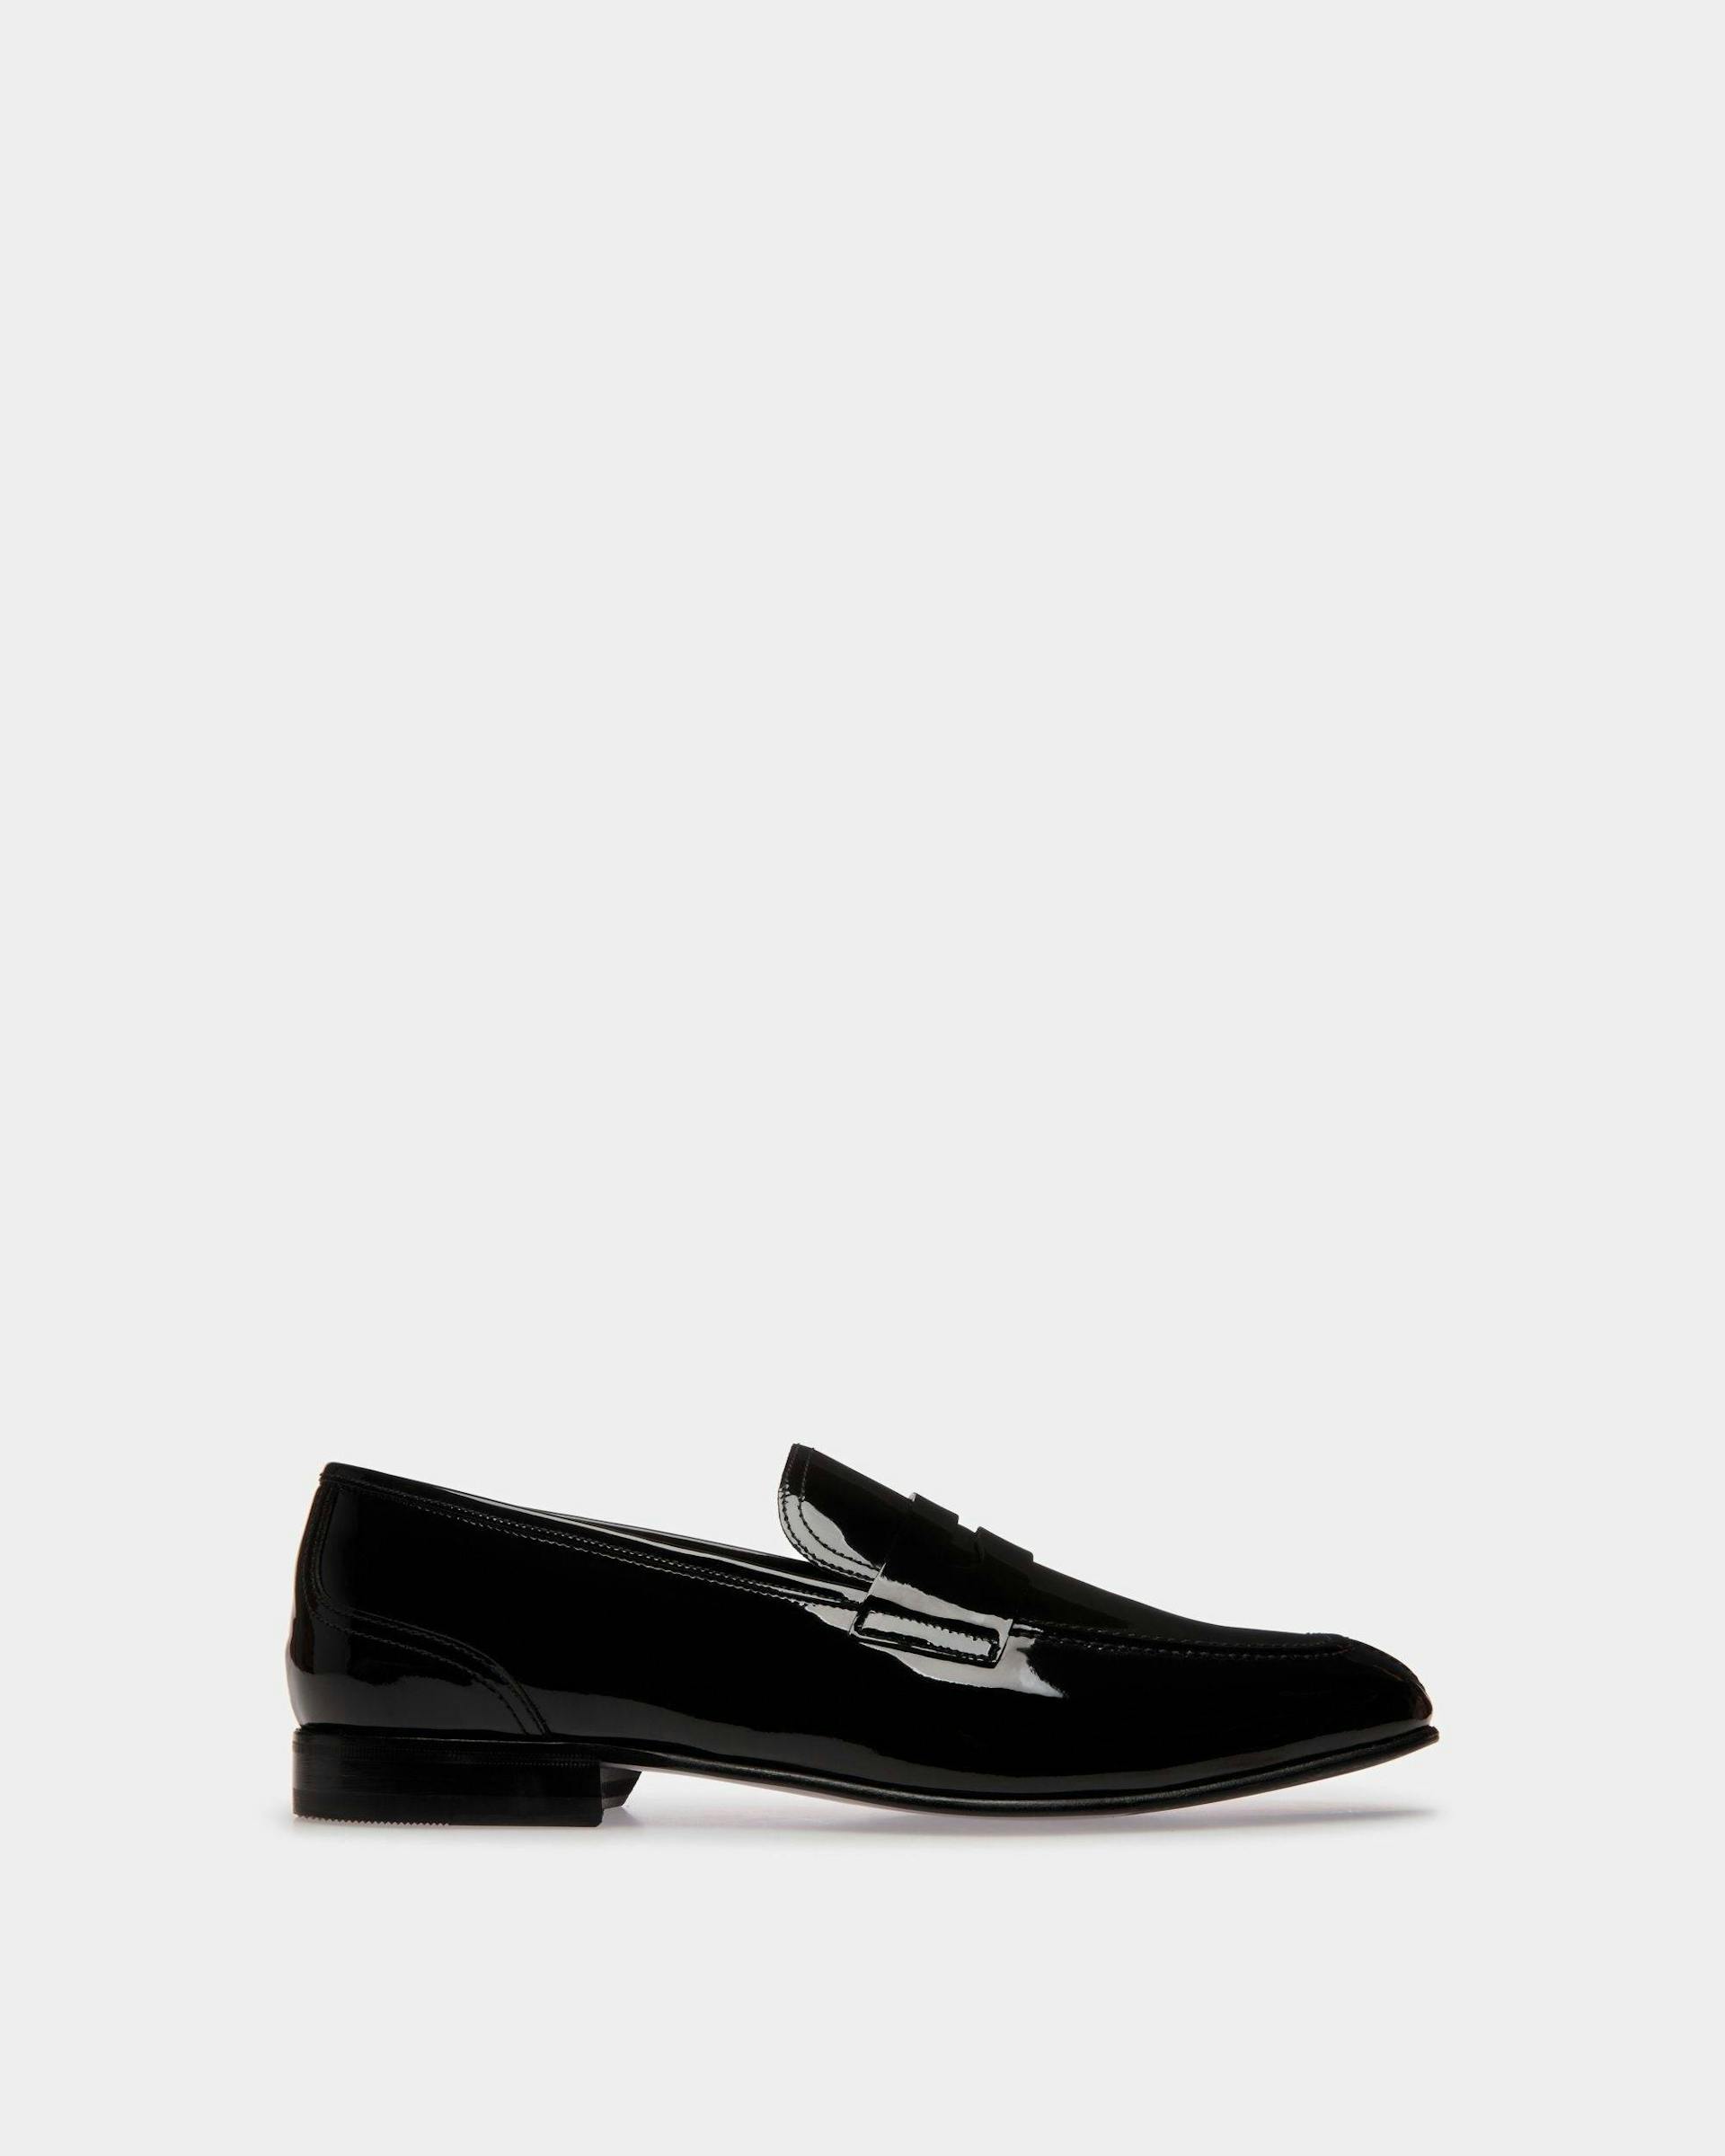 Suisse Loafer in Black Patent Leather - Bally